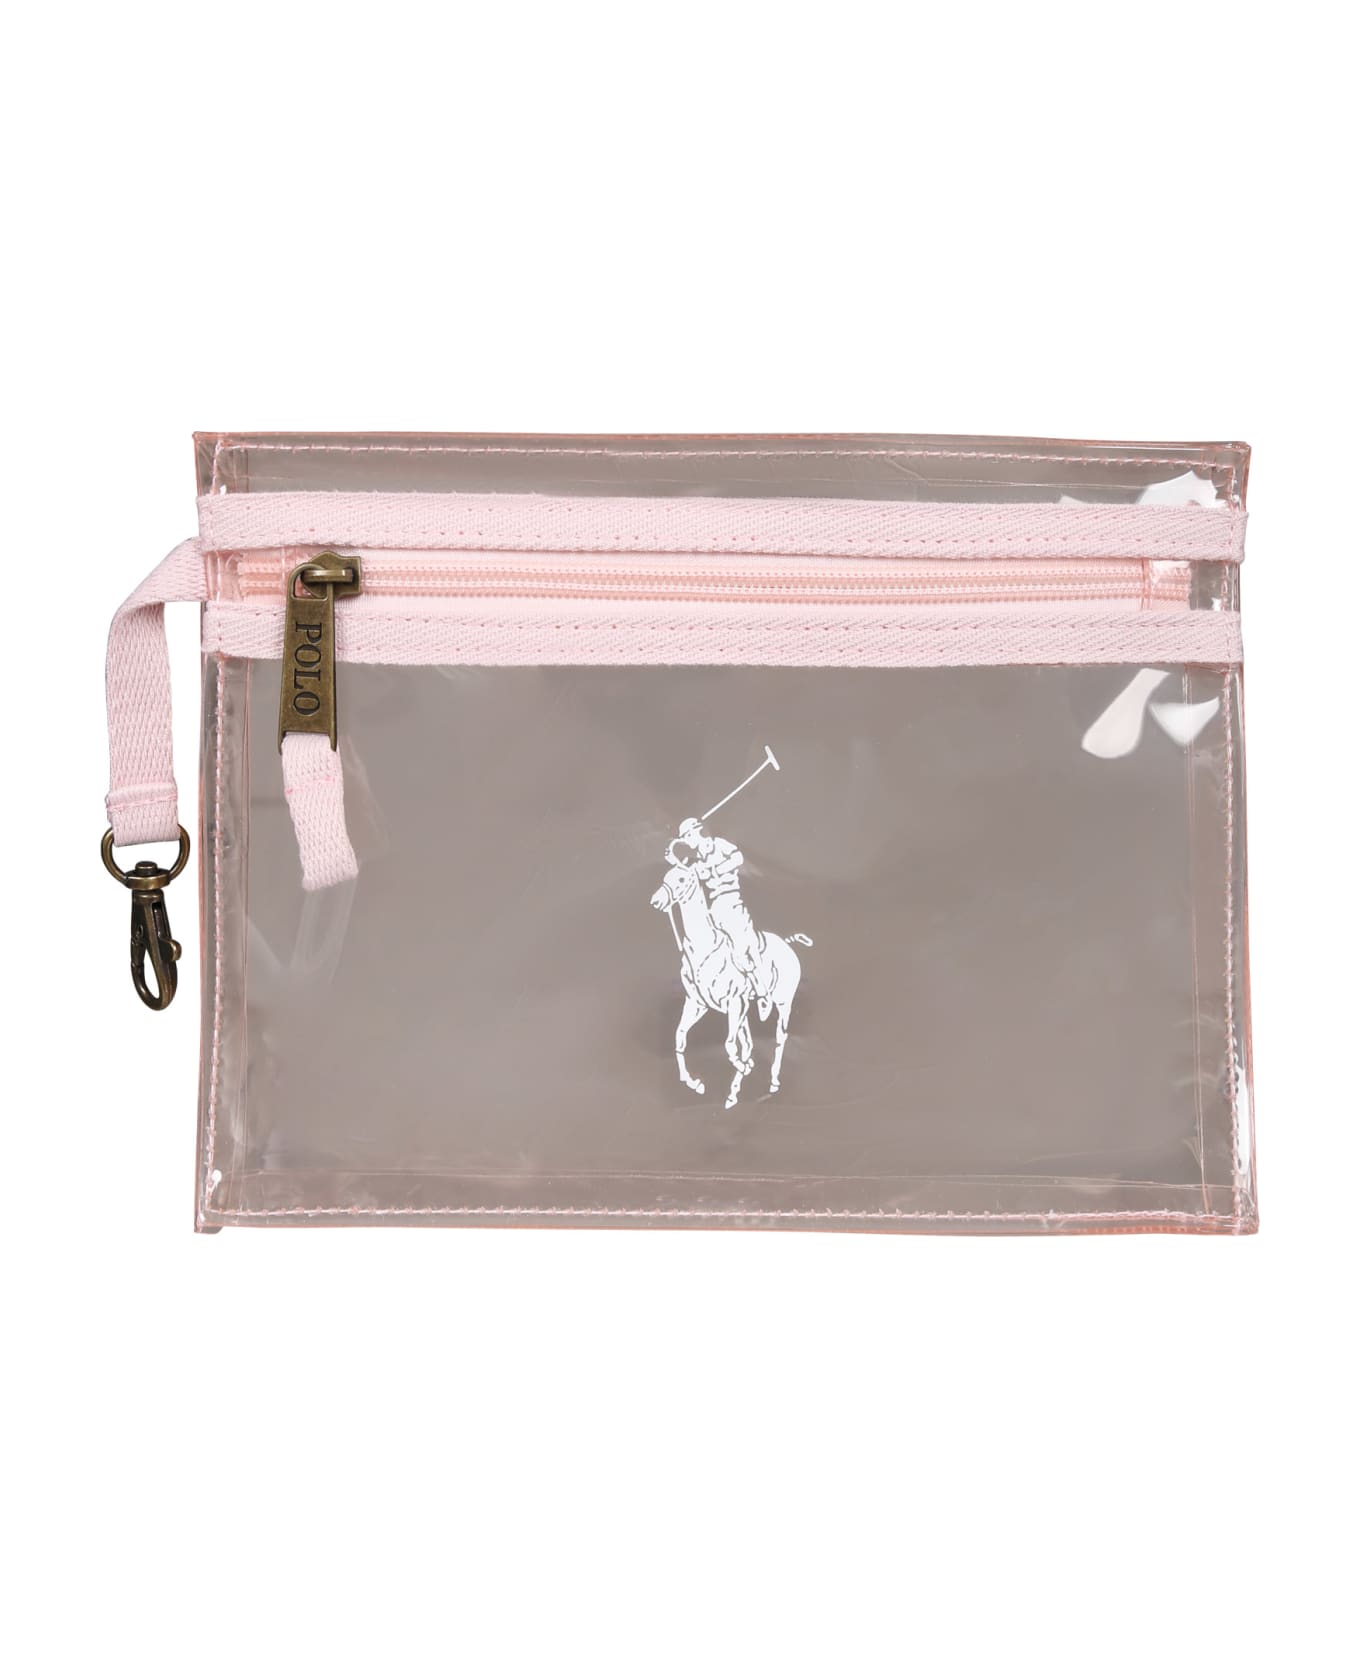 Ralph Lauren Pink Bag For Girl With Pony - Pink アクセサリー＆ギフト